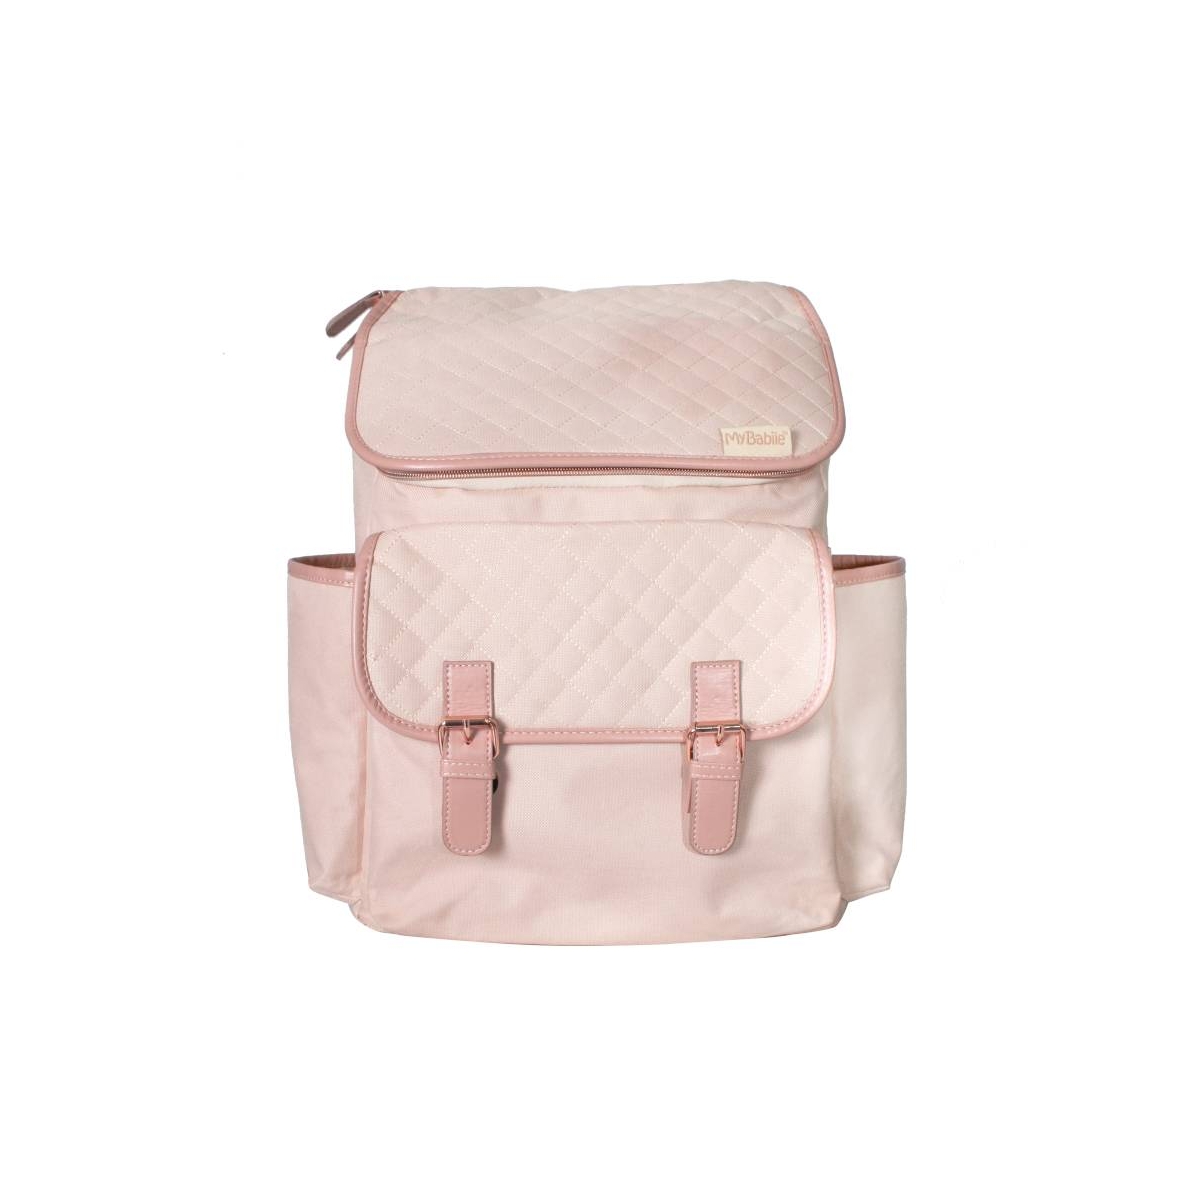 My Babiie Billie Faiers Backpack Changing Bag